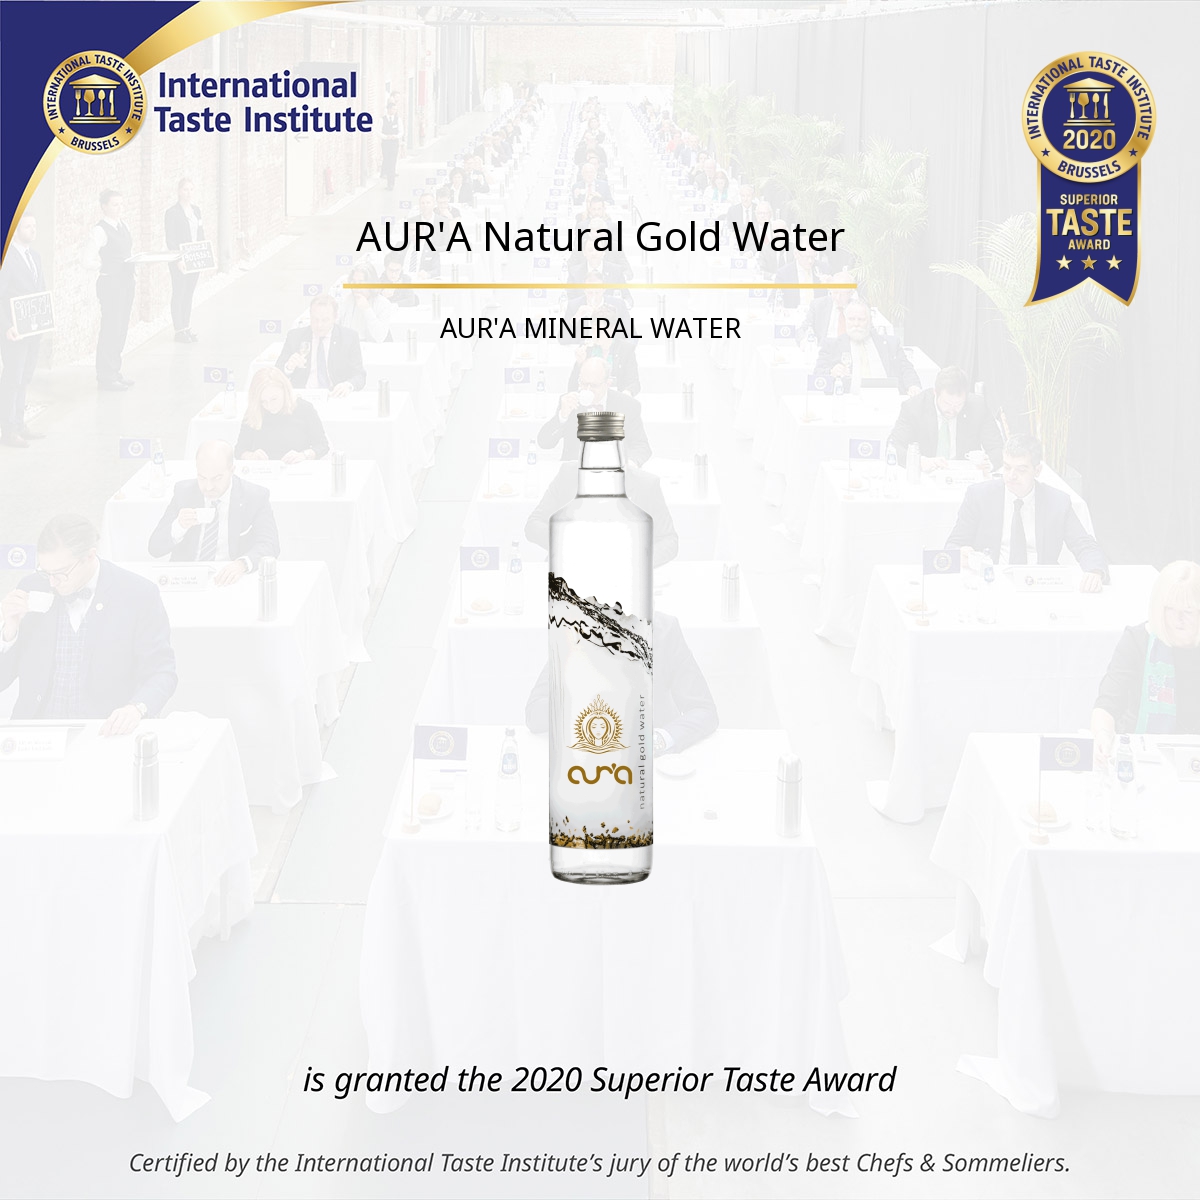 Square image of AUR'A Natural Gold Water